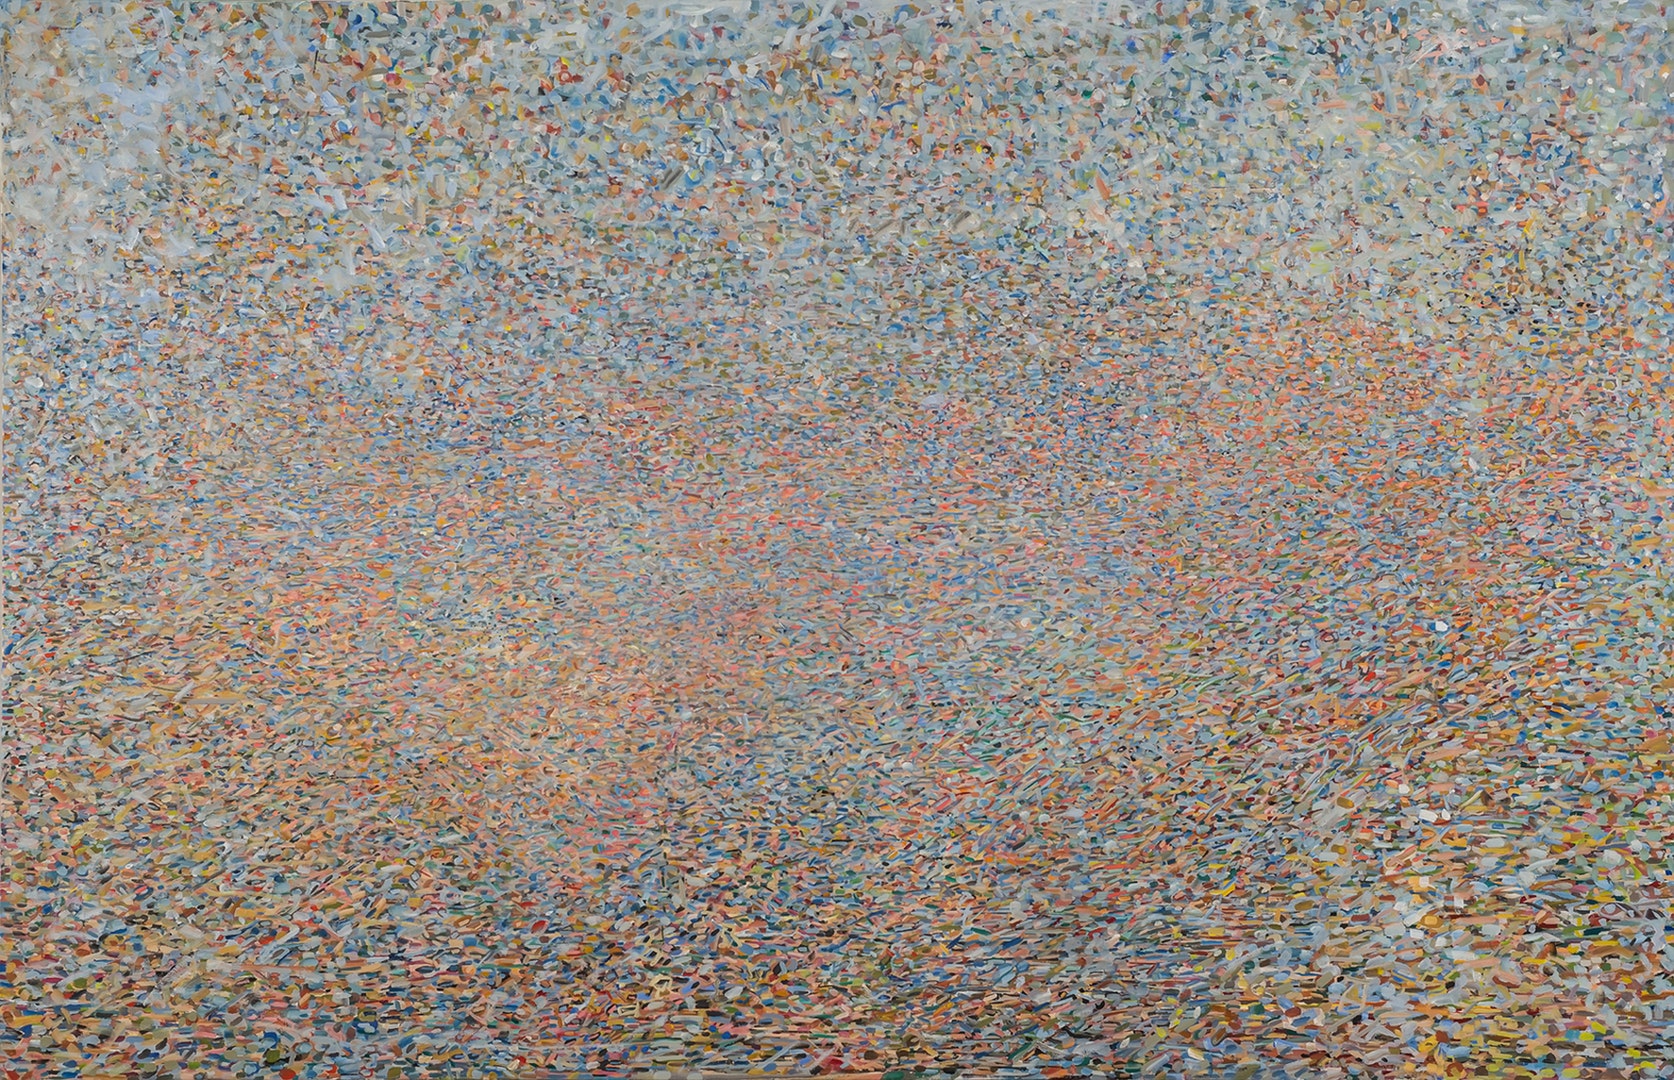 'View of Nahal Rahaf 2018', Zohar Cohen, Tempera on canvas, 164 x 252 cm